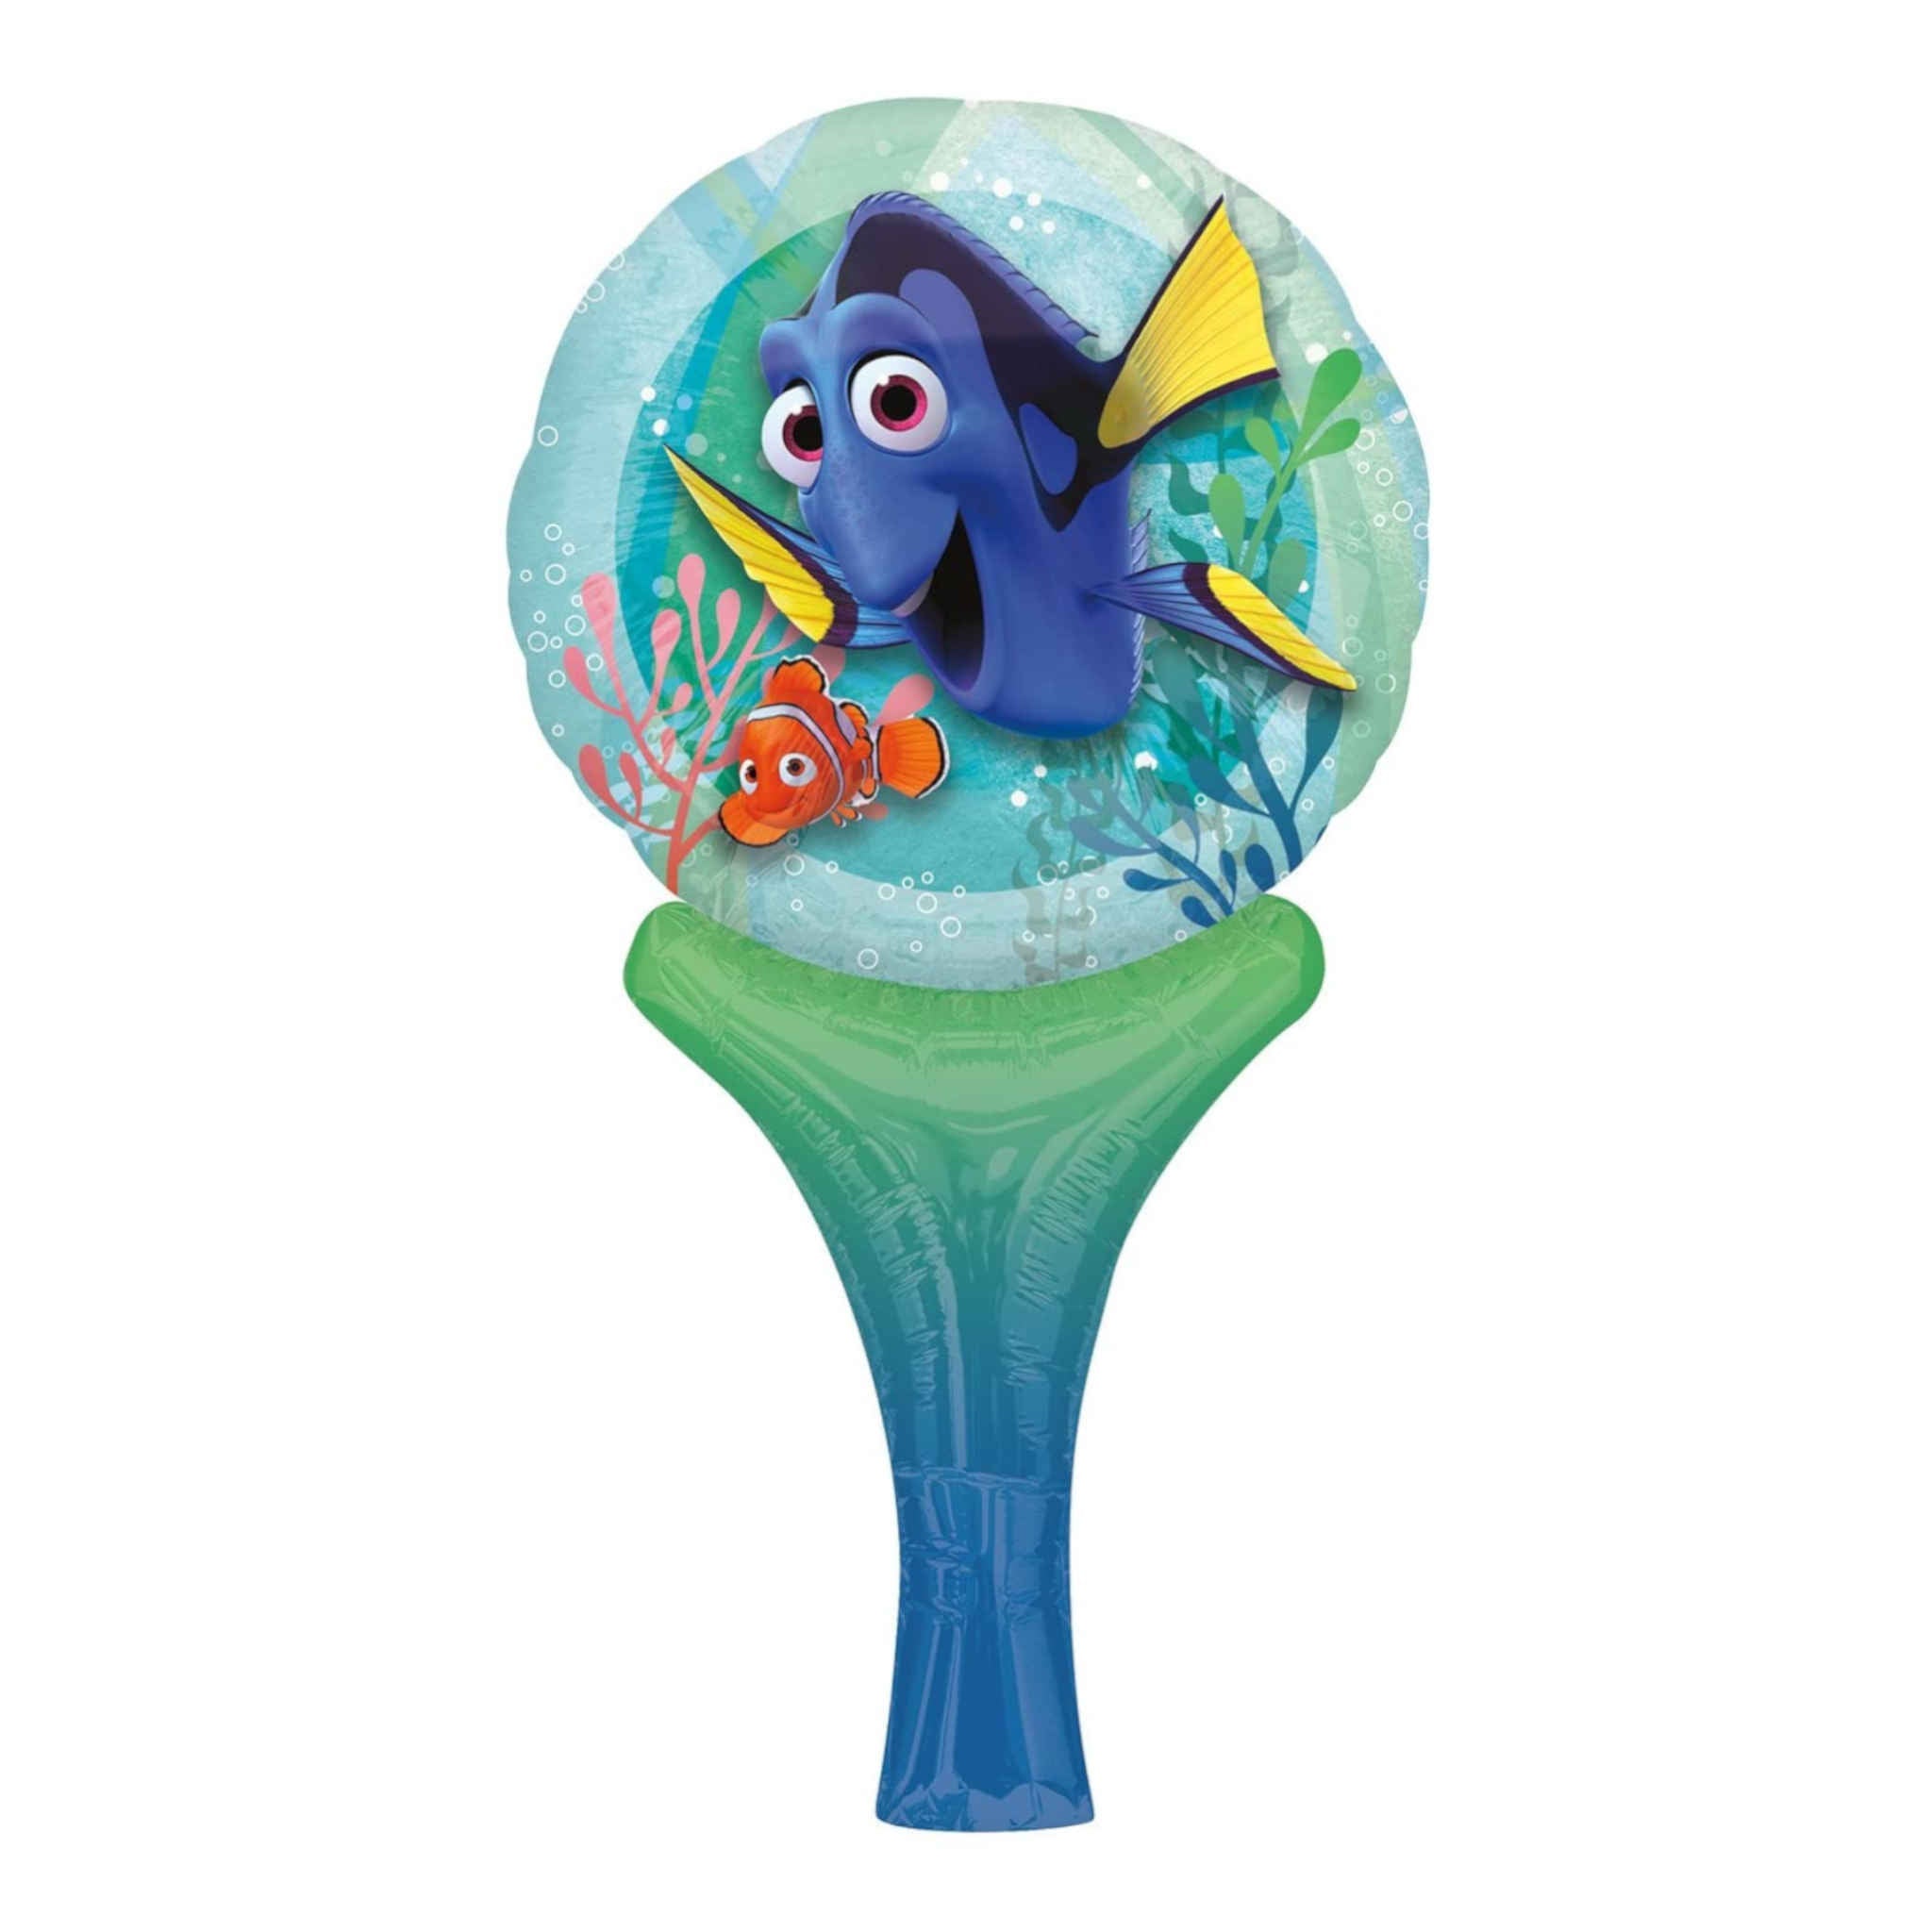 Disney Pixar Finding Dory Inflate a Fun | 12 inch